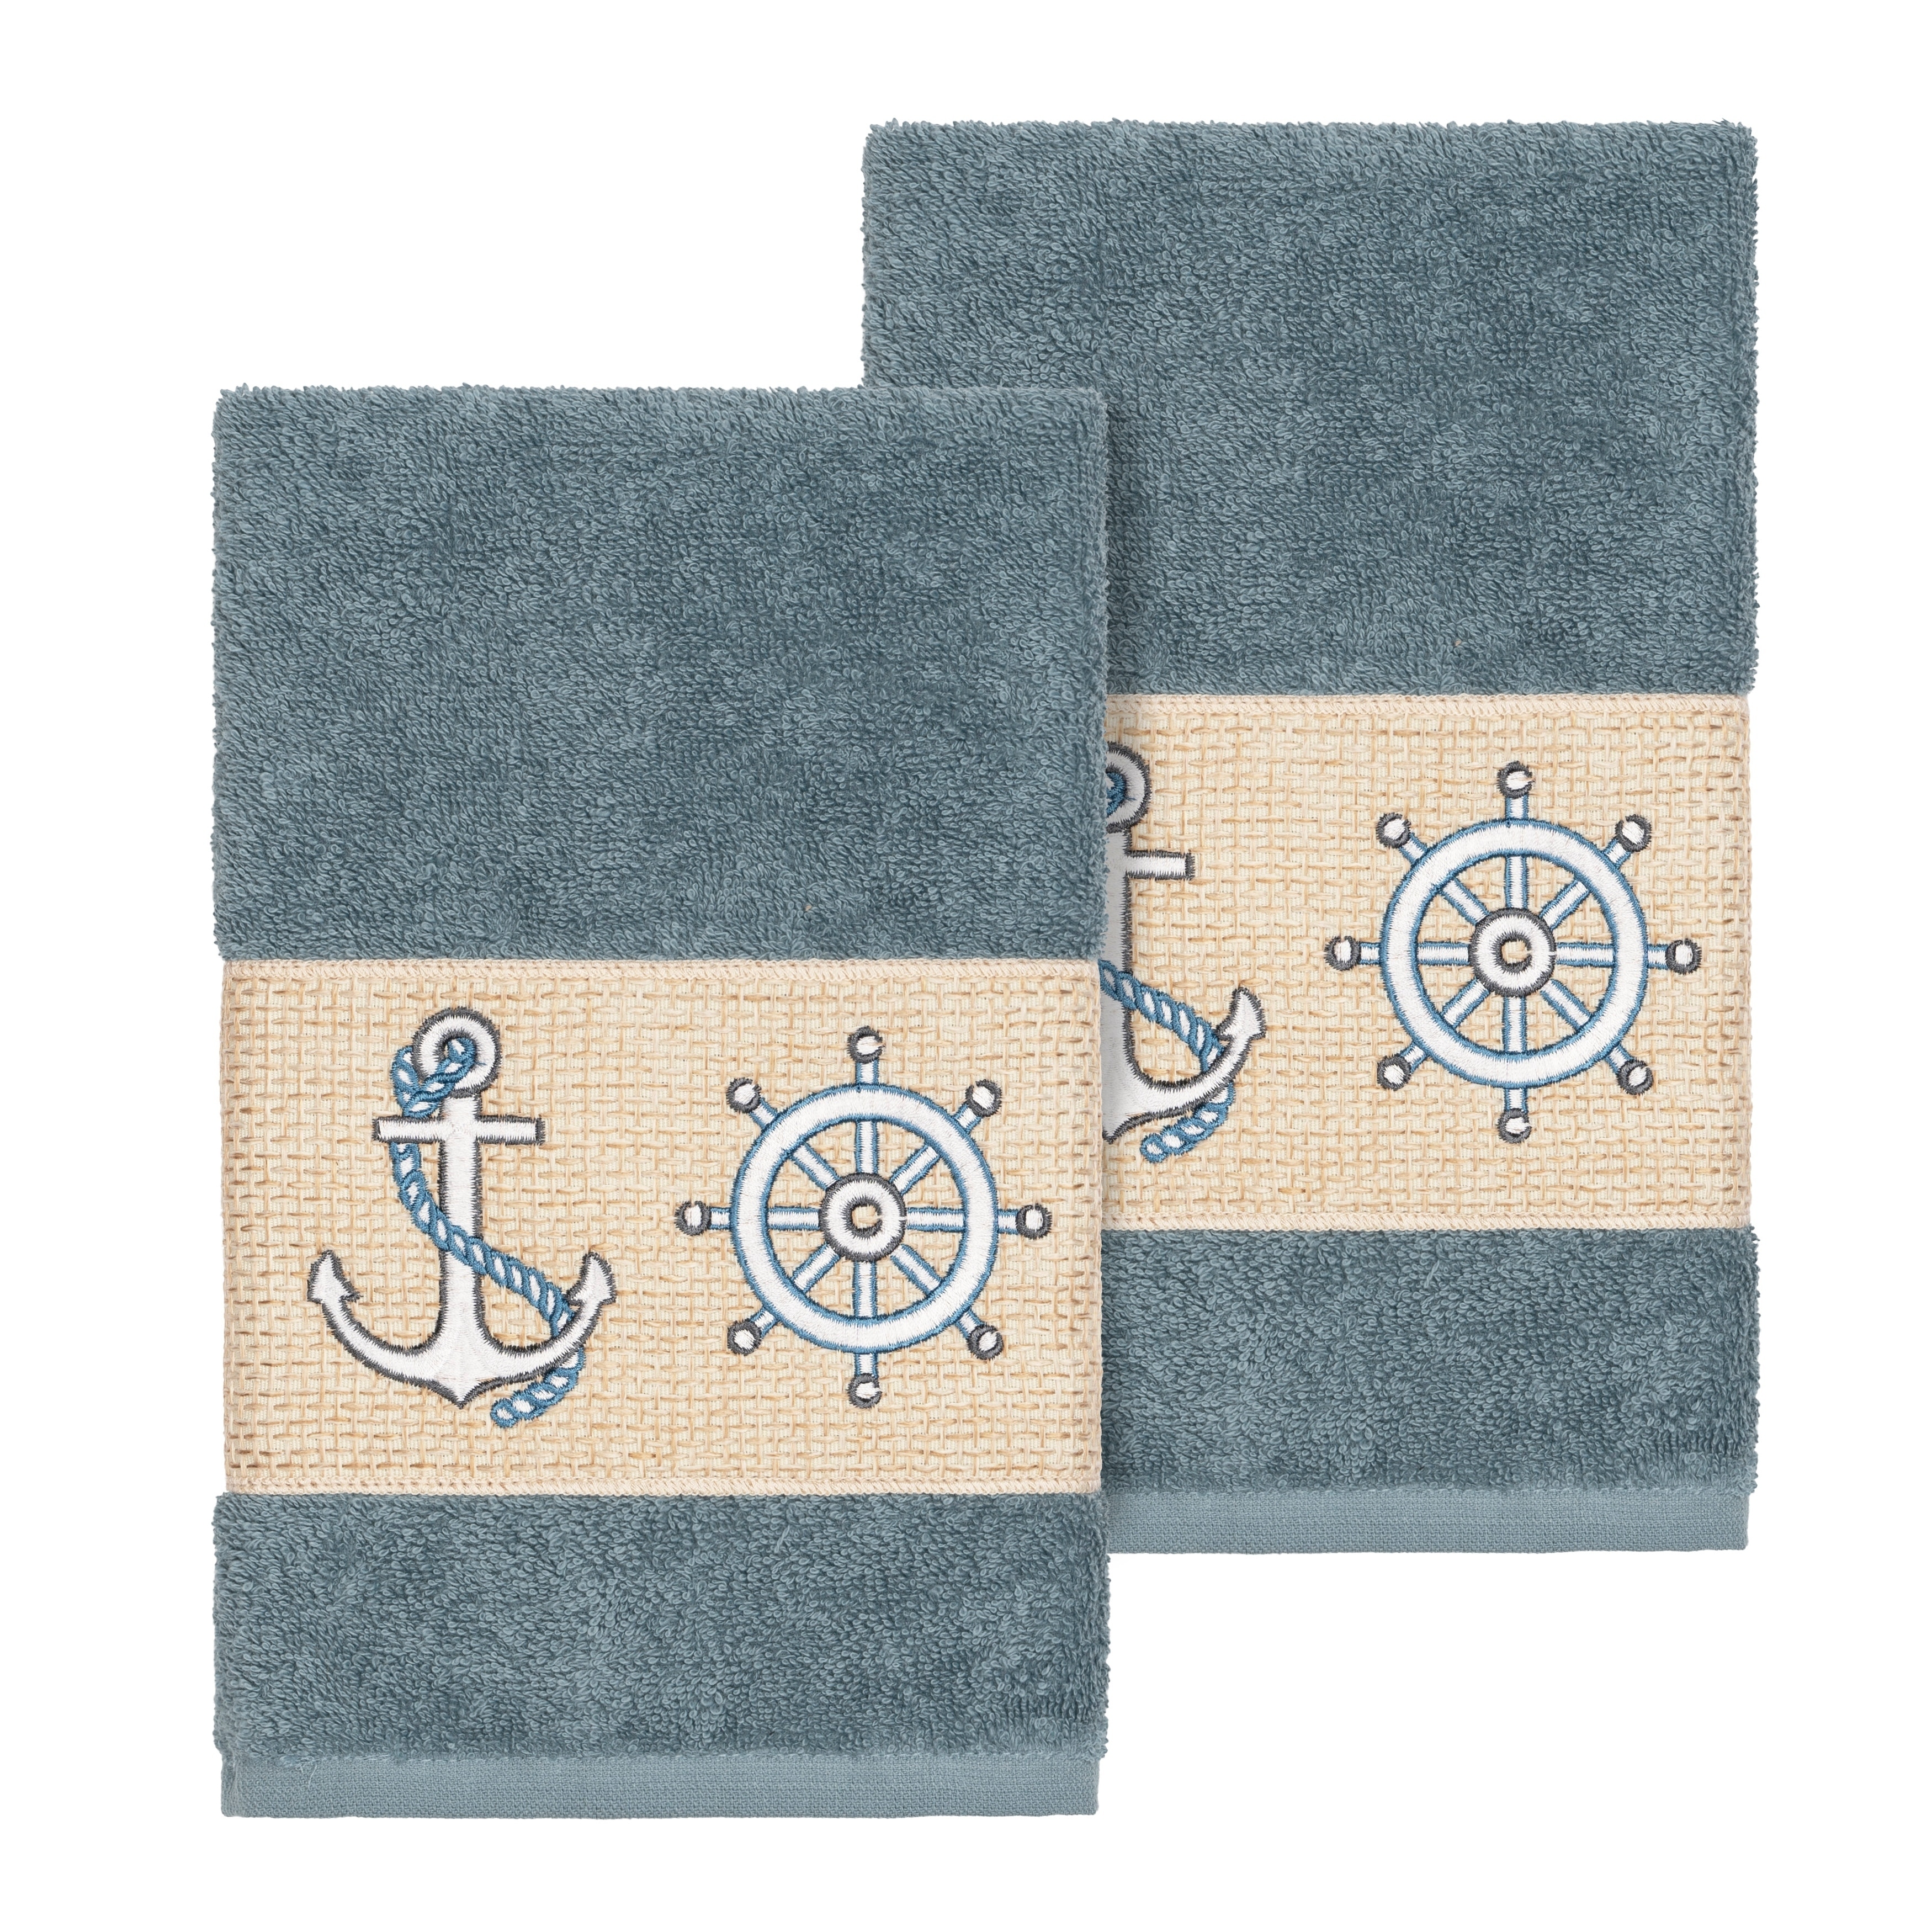 https://ak1.ostkcdn.com/images/products/22355557/Authentic-Hotel-and-Spa-Turkish-Cotton-Nautical-Embroidered-Teal-Blue-2-piece-Towel-Hand-Set-d5a16d69-0370-42c8-bc1c-1847bf403f3d.jpg